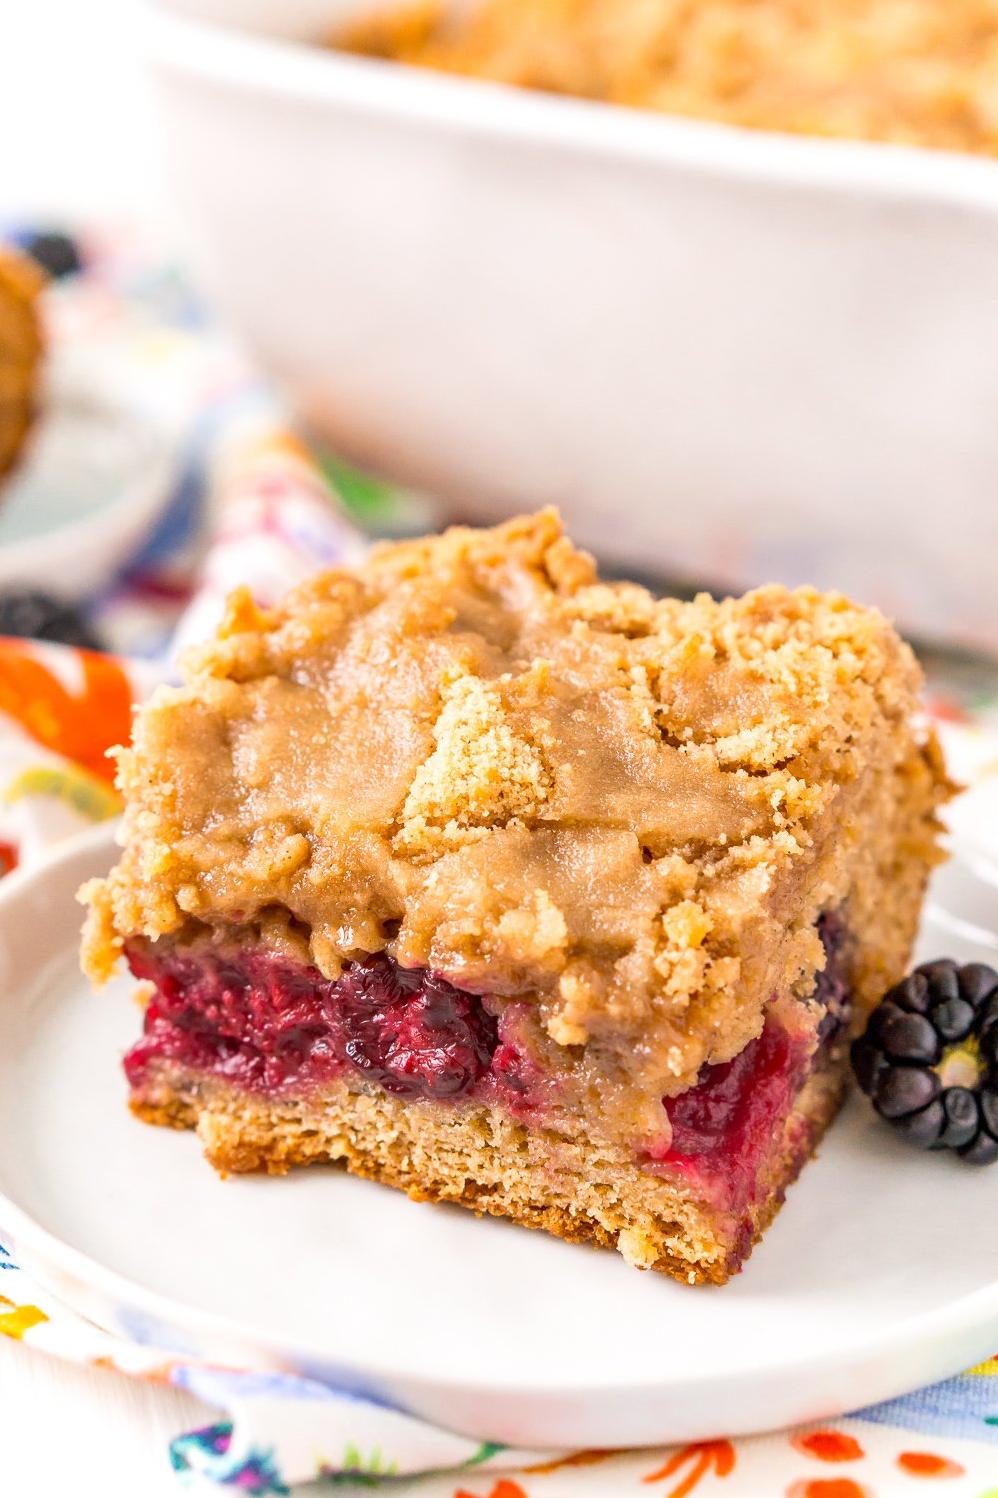  Take a break from your regular morning routine and try this delicious coffee cake recipe.